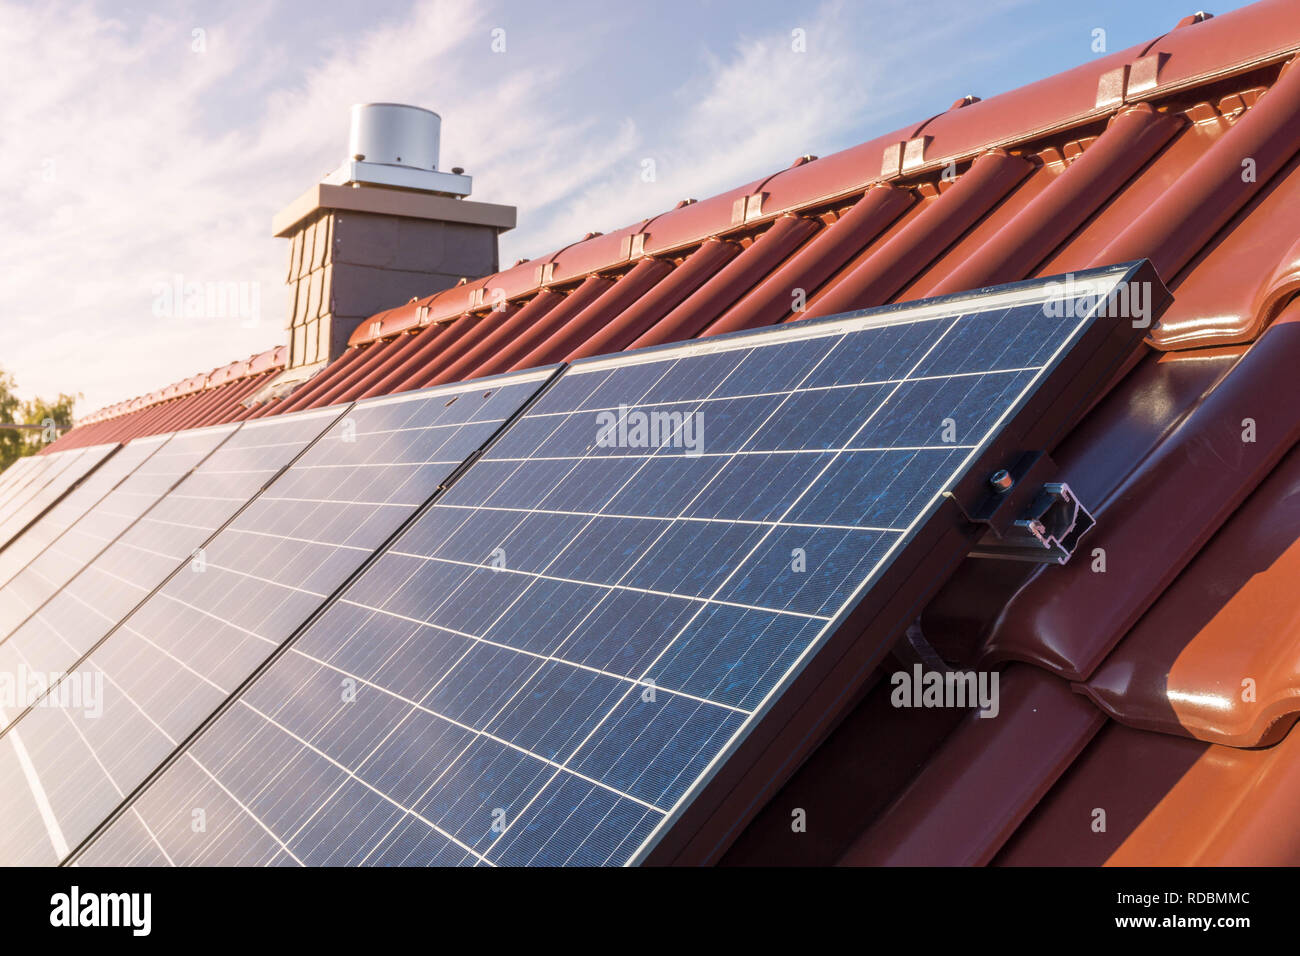 solar panels or photovoltaic power plant on a red tiled roof Stock Photo